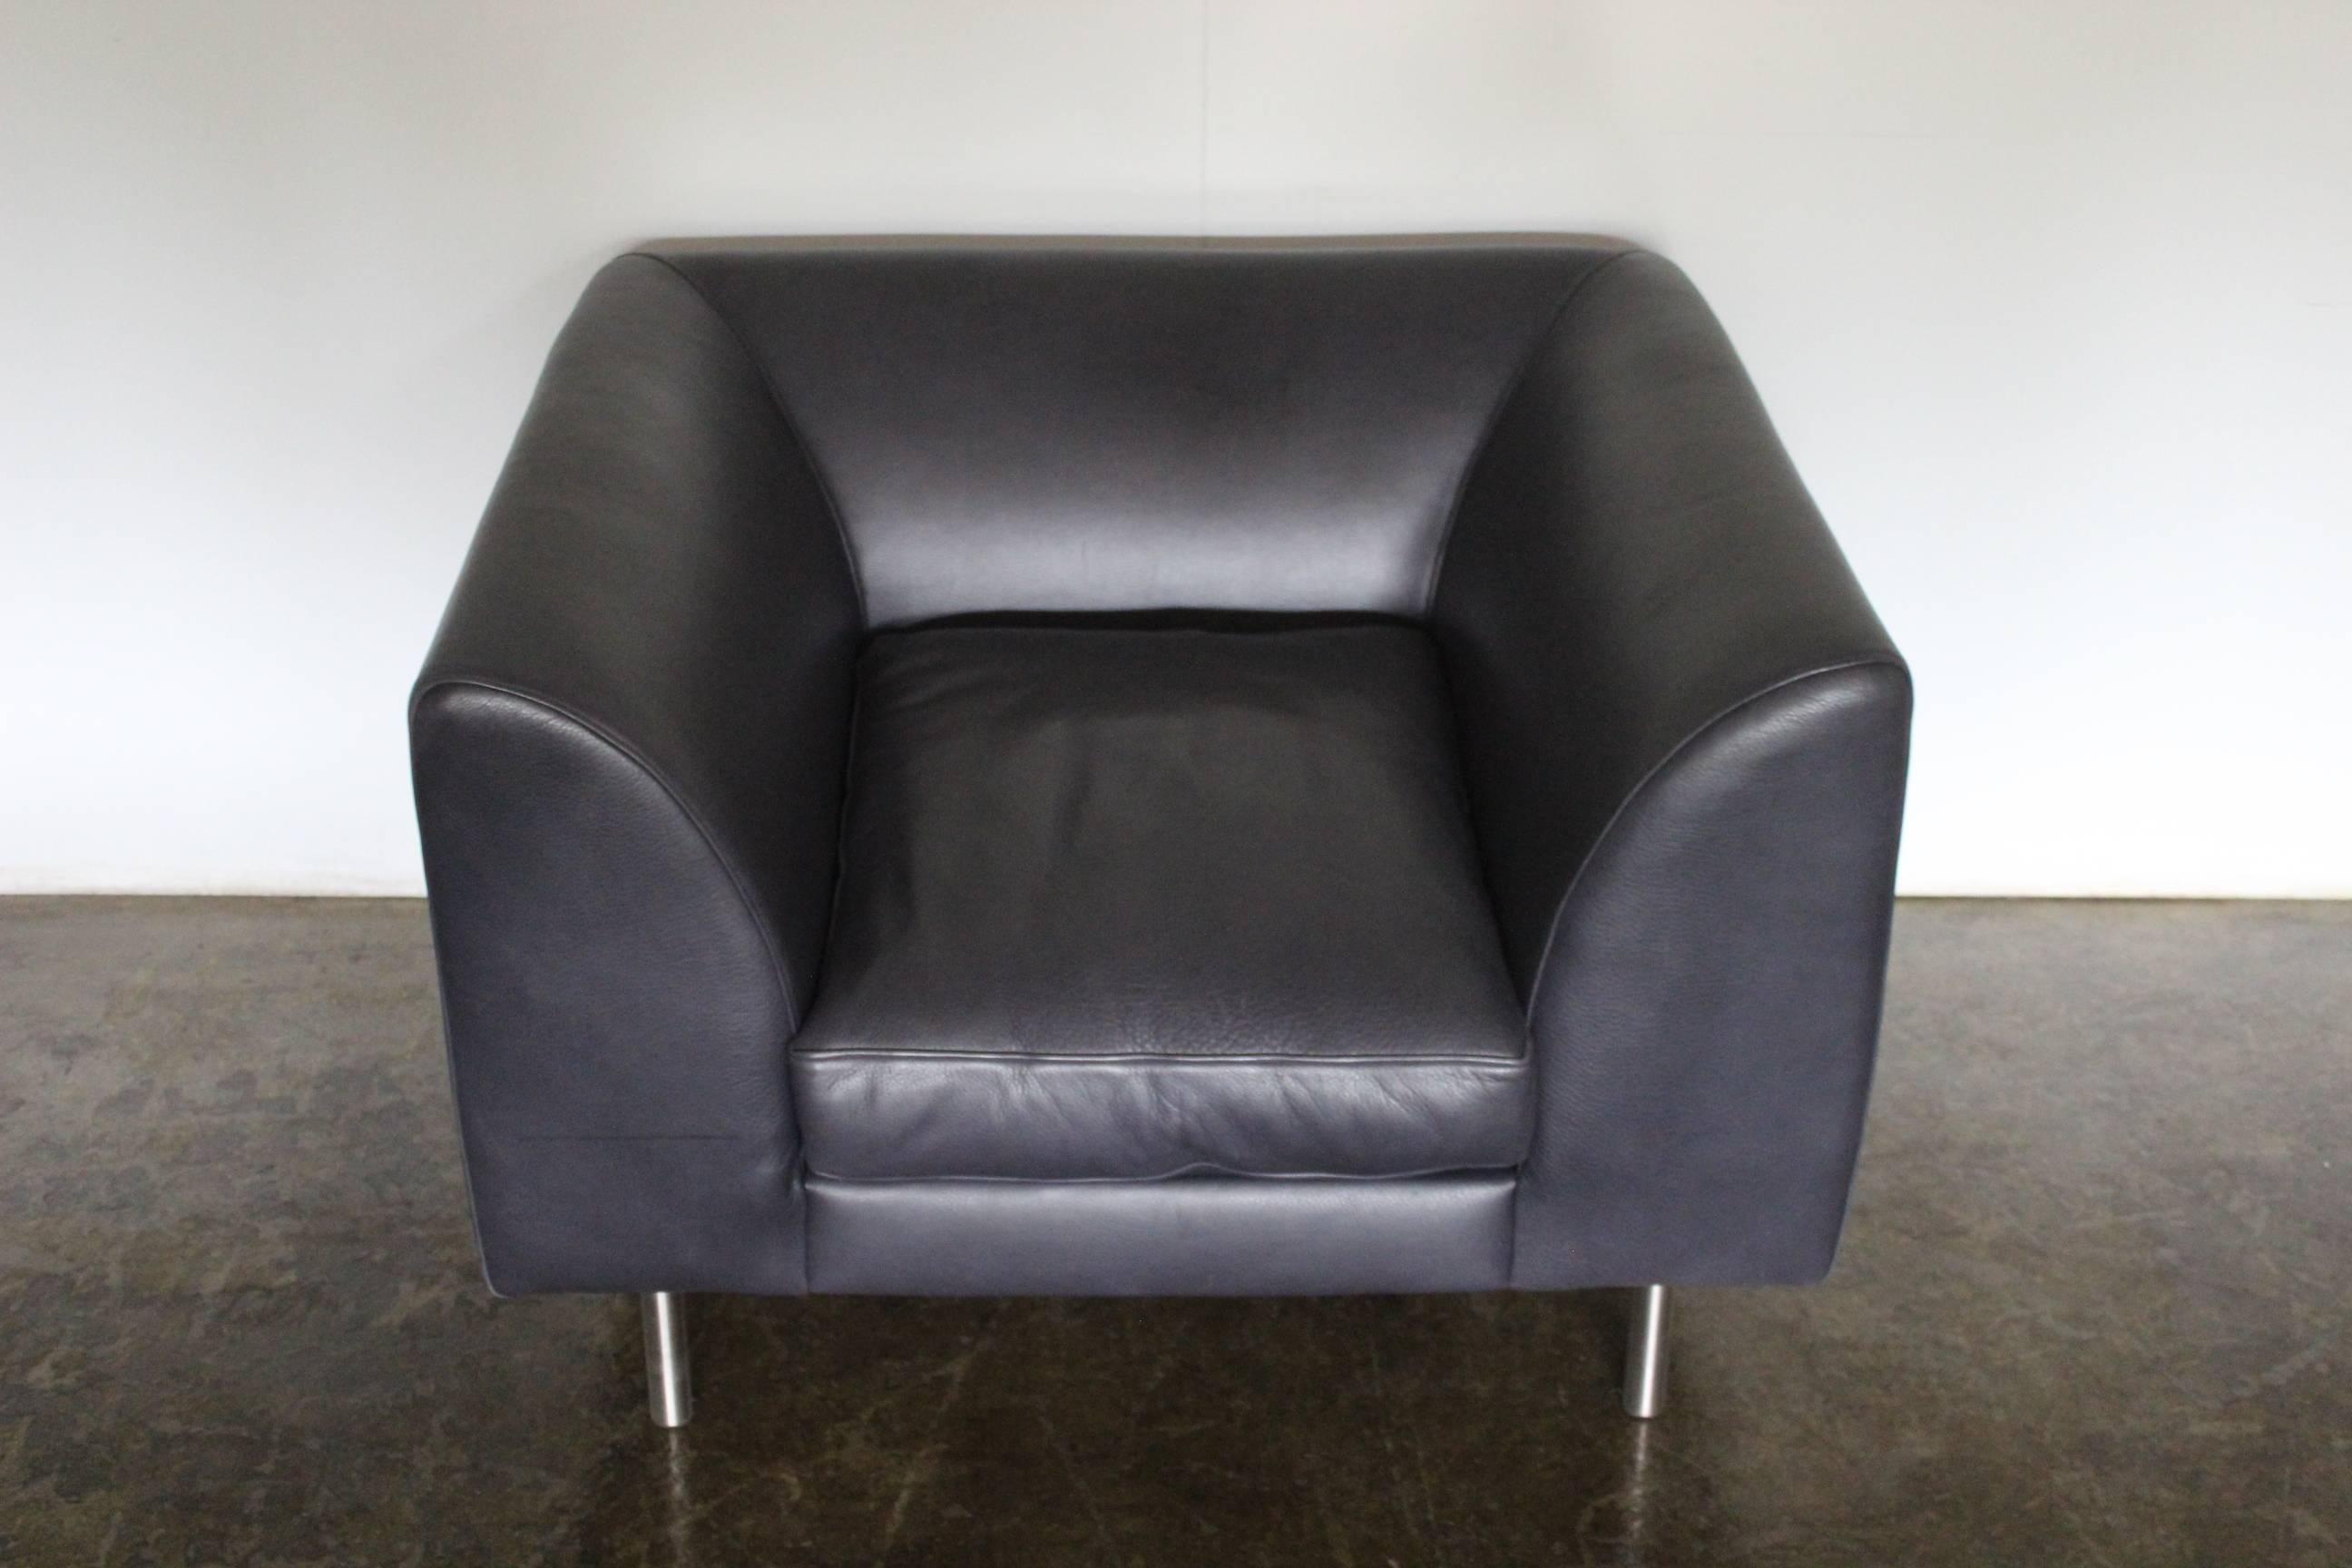 Hand-Crafted SCP “Woodgate” Six-Seat L-Shape Sofa, Armchair and Ottoman Suite in Navy Leather